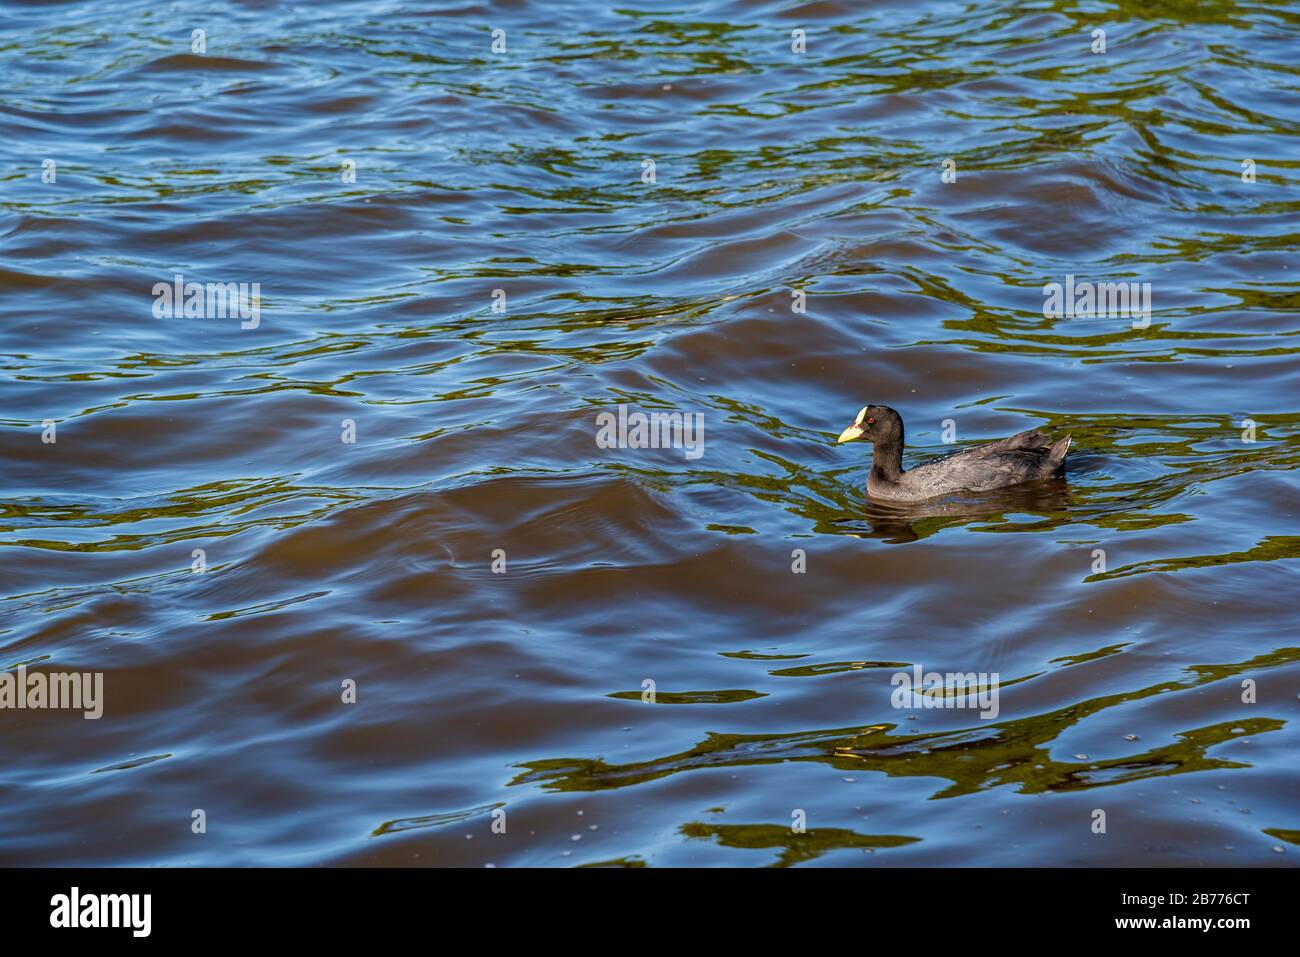 Single duck swiming alone in the water Stock Photo